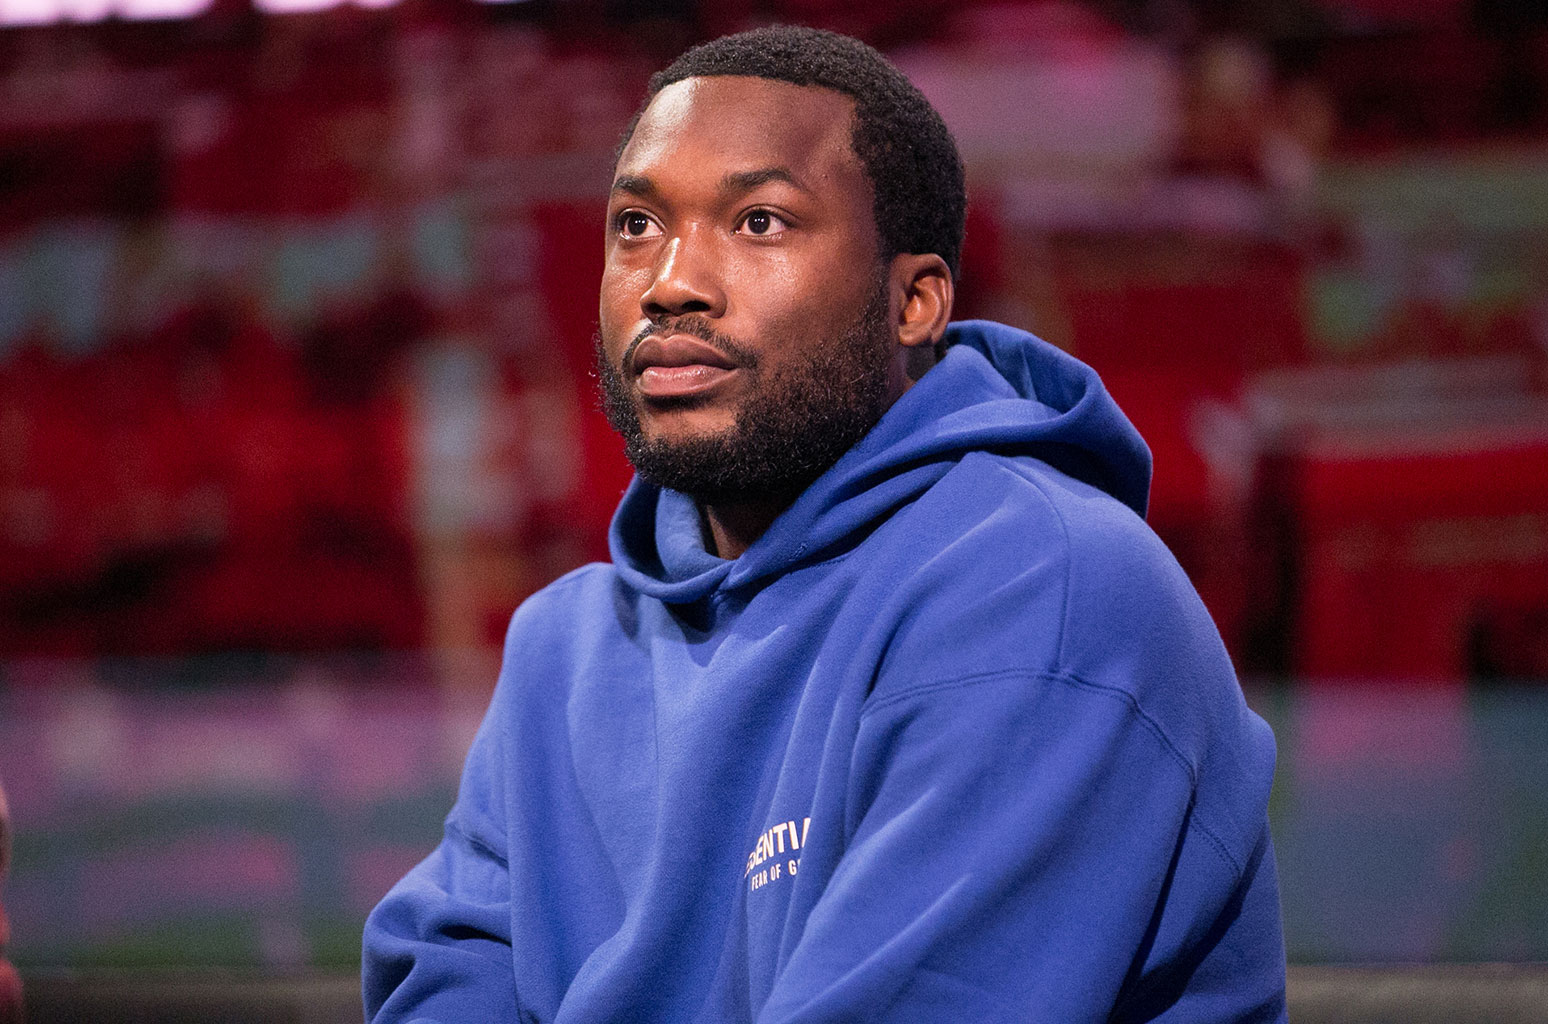 Watch Meek Mill Try to Master AutoTune to Compete With the 'Young Bulls' - www.billboard.com